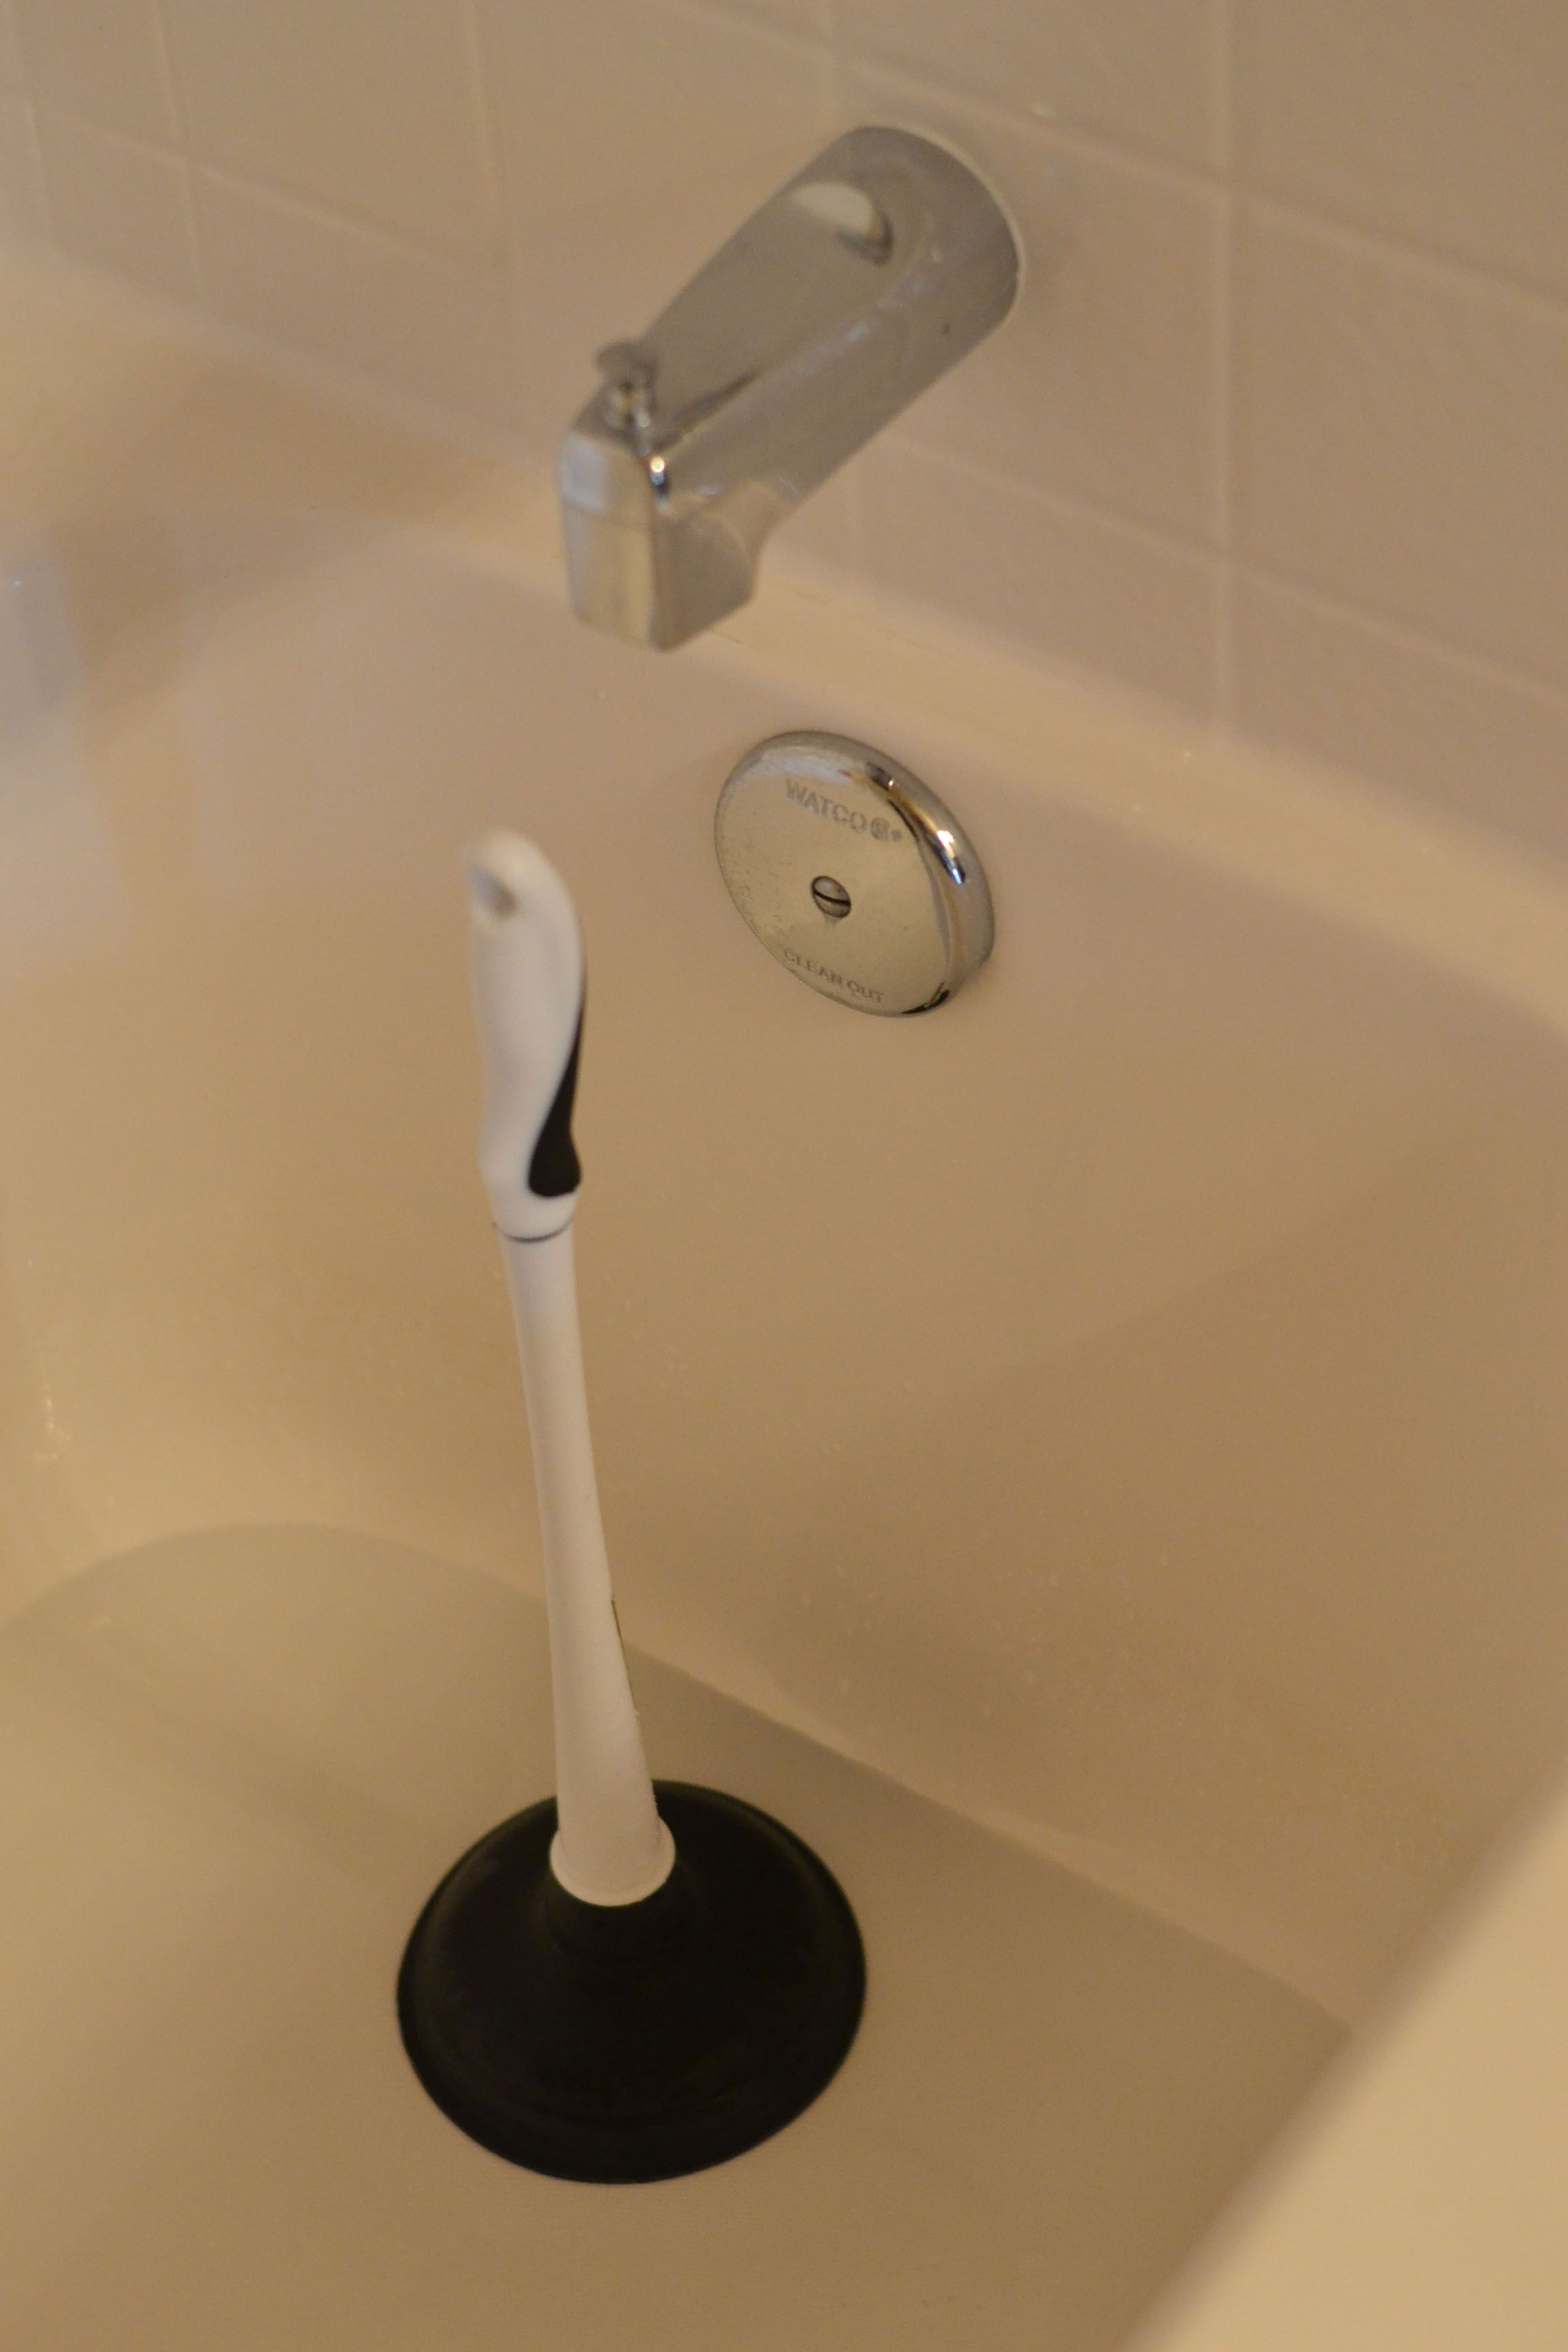 Use A Plunger To Dislodge Wad Of Hair Plugging Bathtub Drain throughout measurements 2304 X 3456